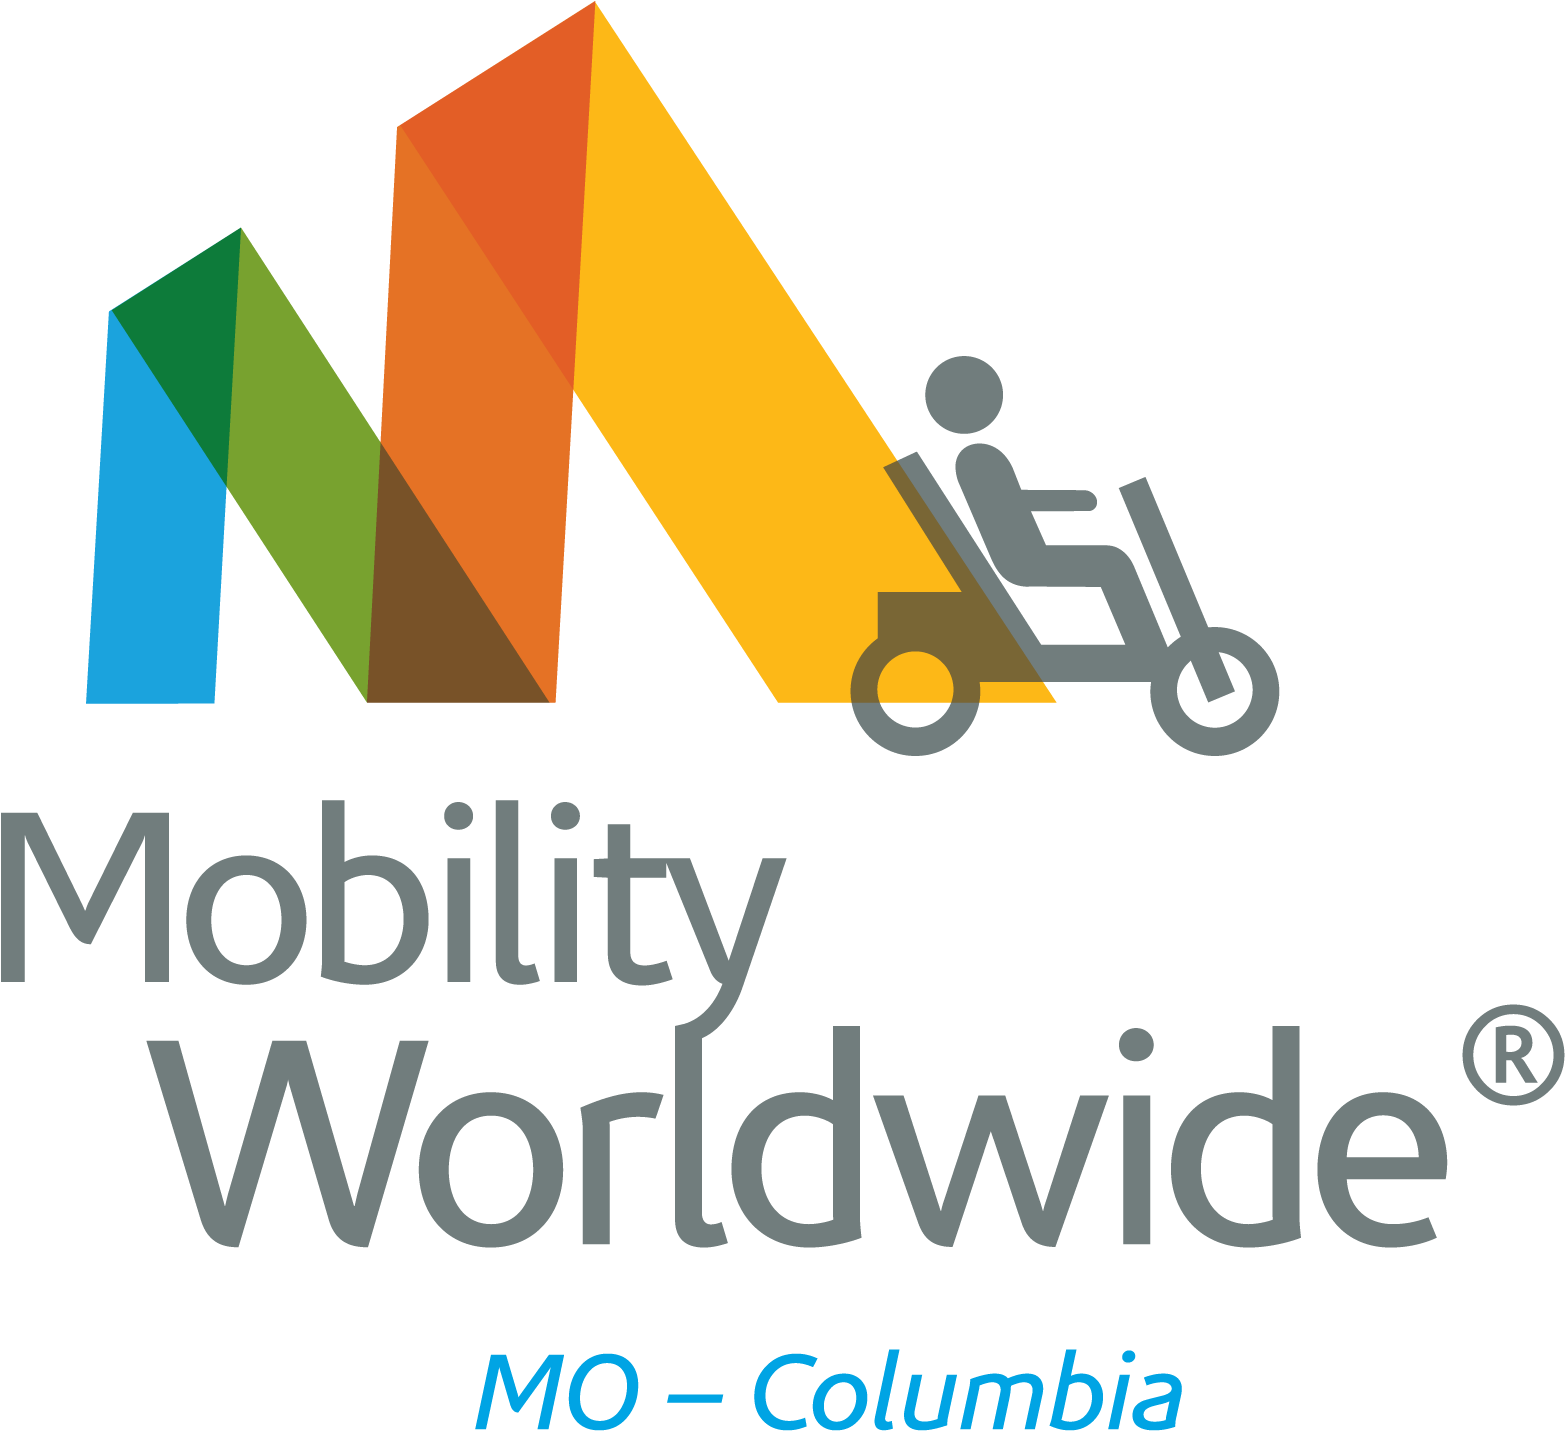 Mobility Worldwide Mo-columbia - Mobility Worldwide (1568x1455), Png Download